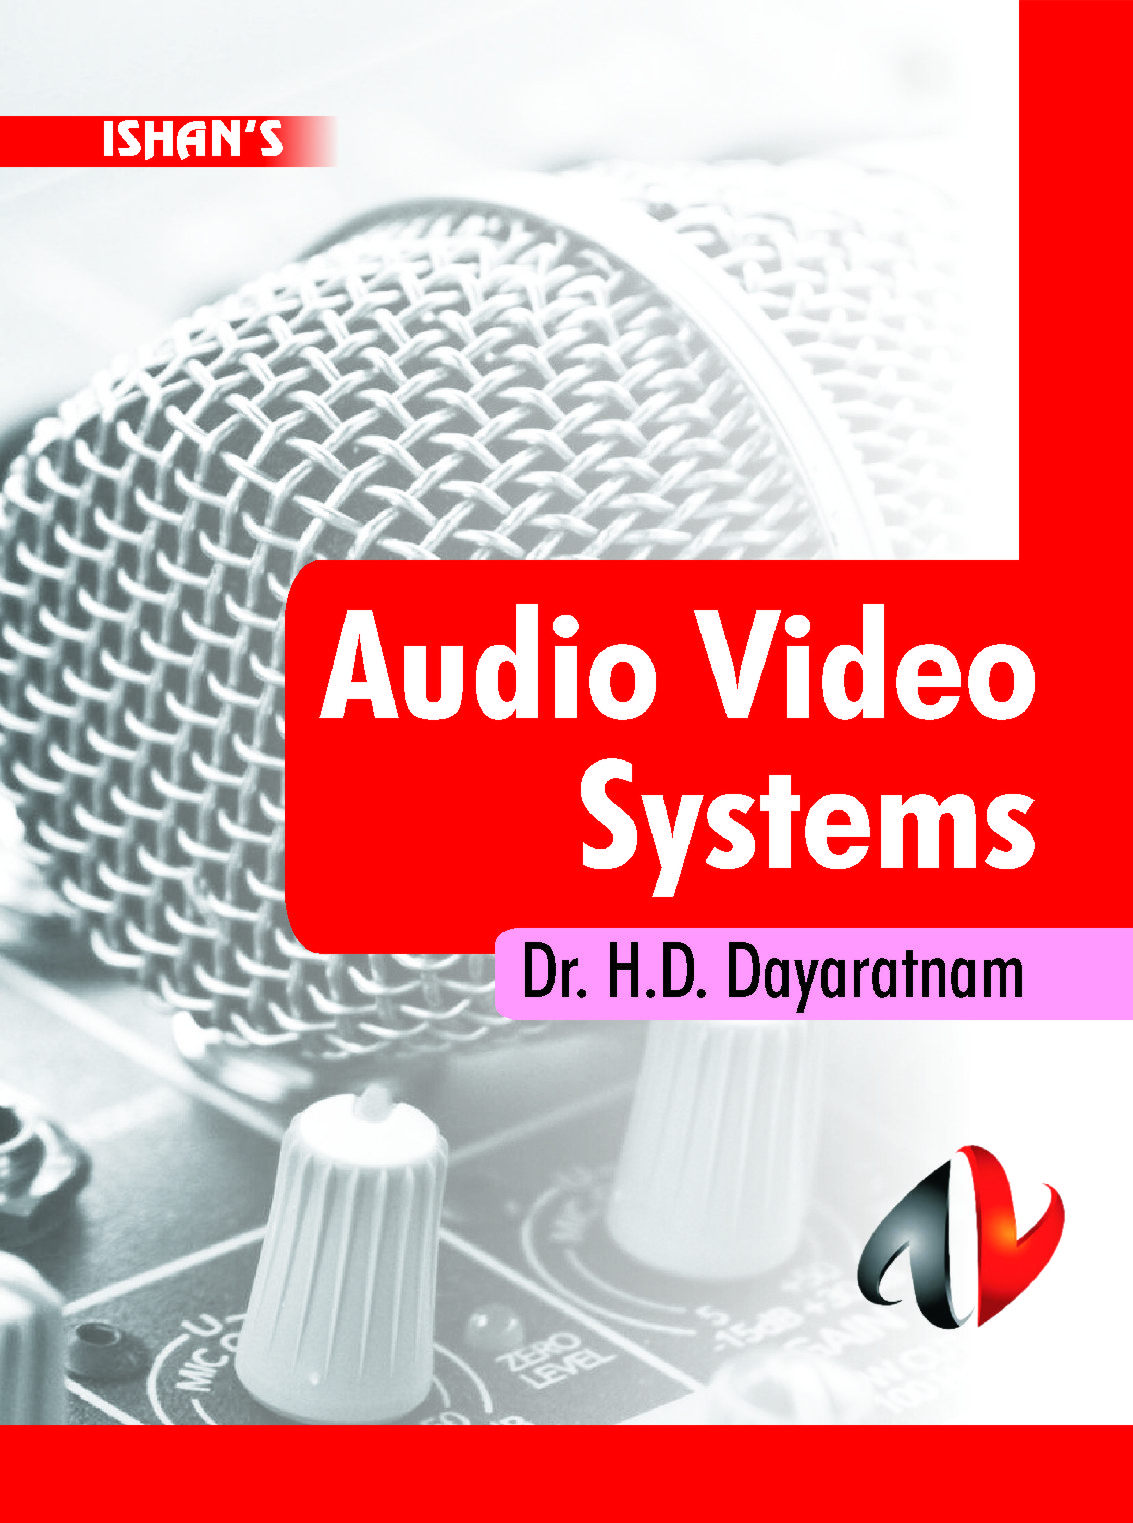 Audio and Video systems